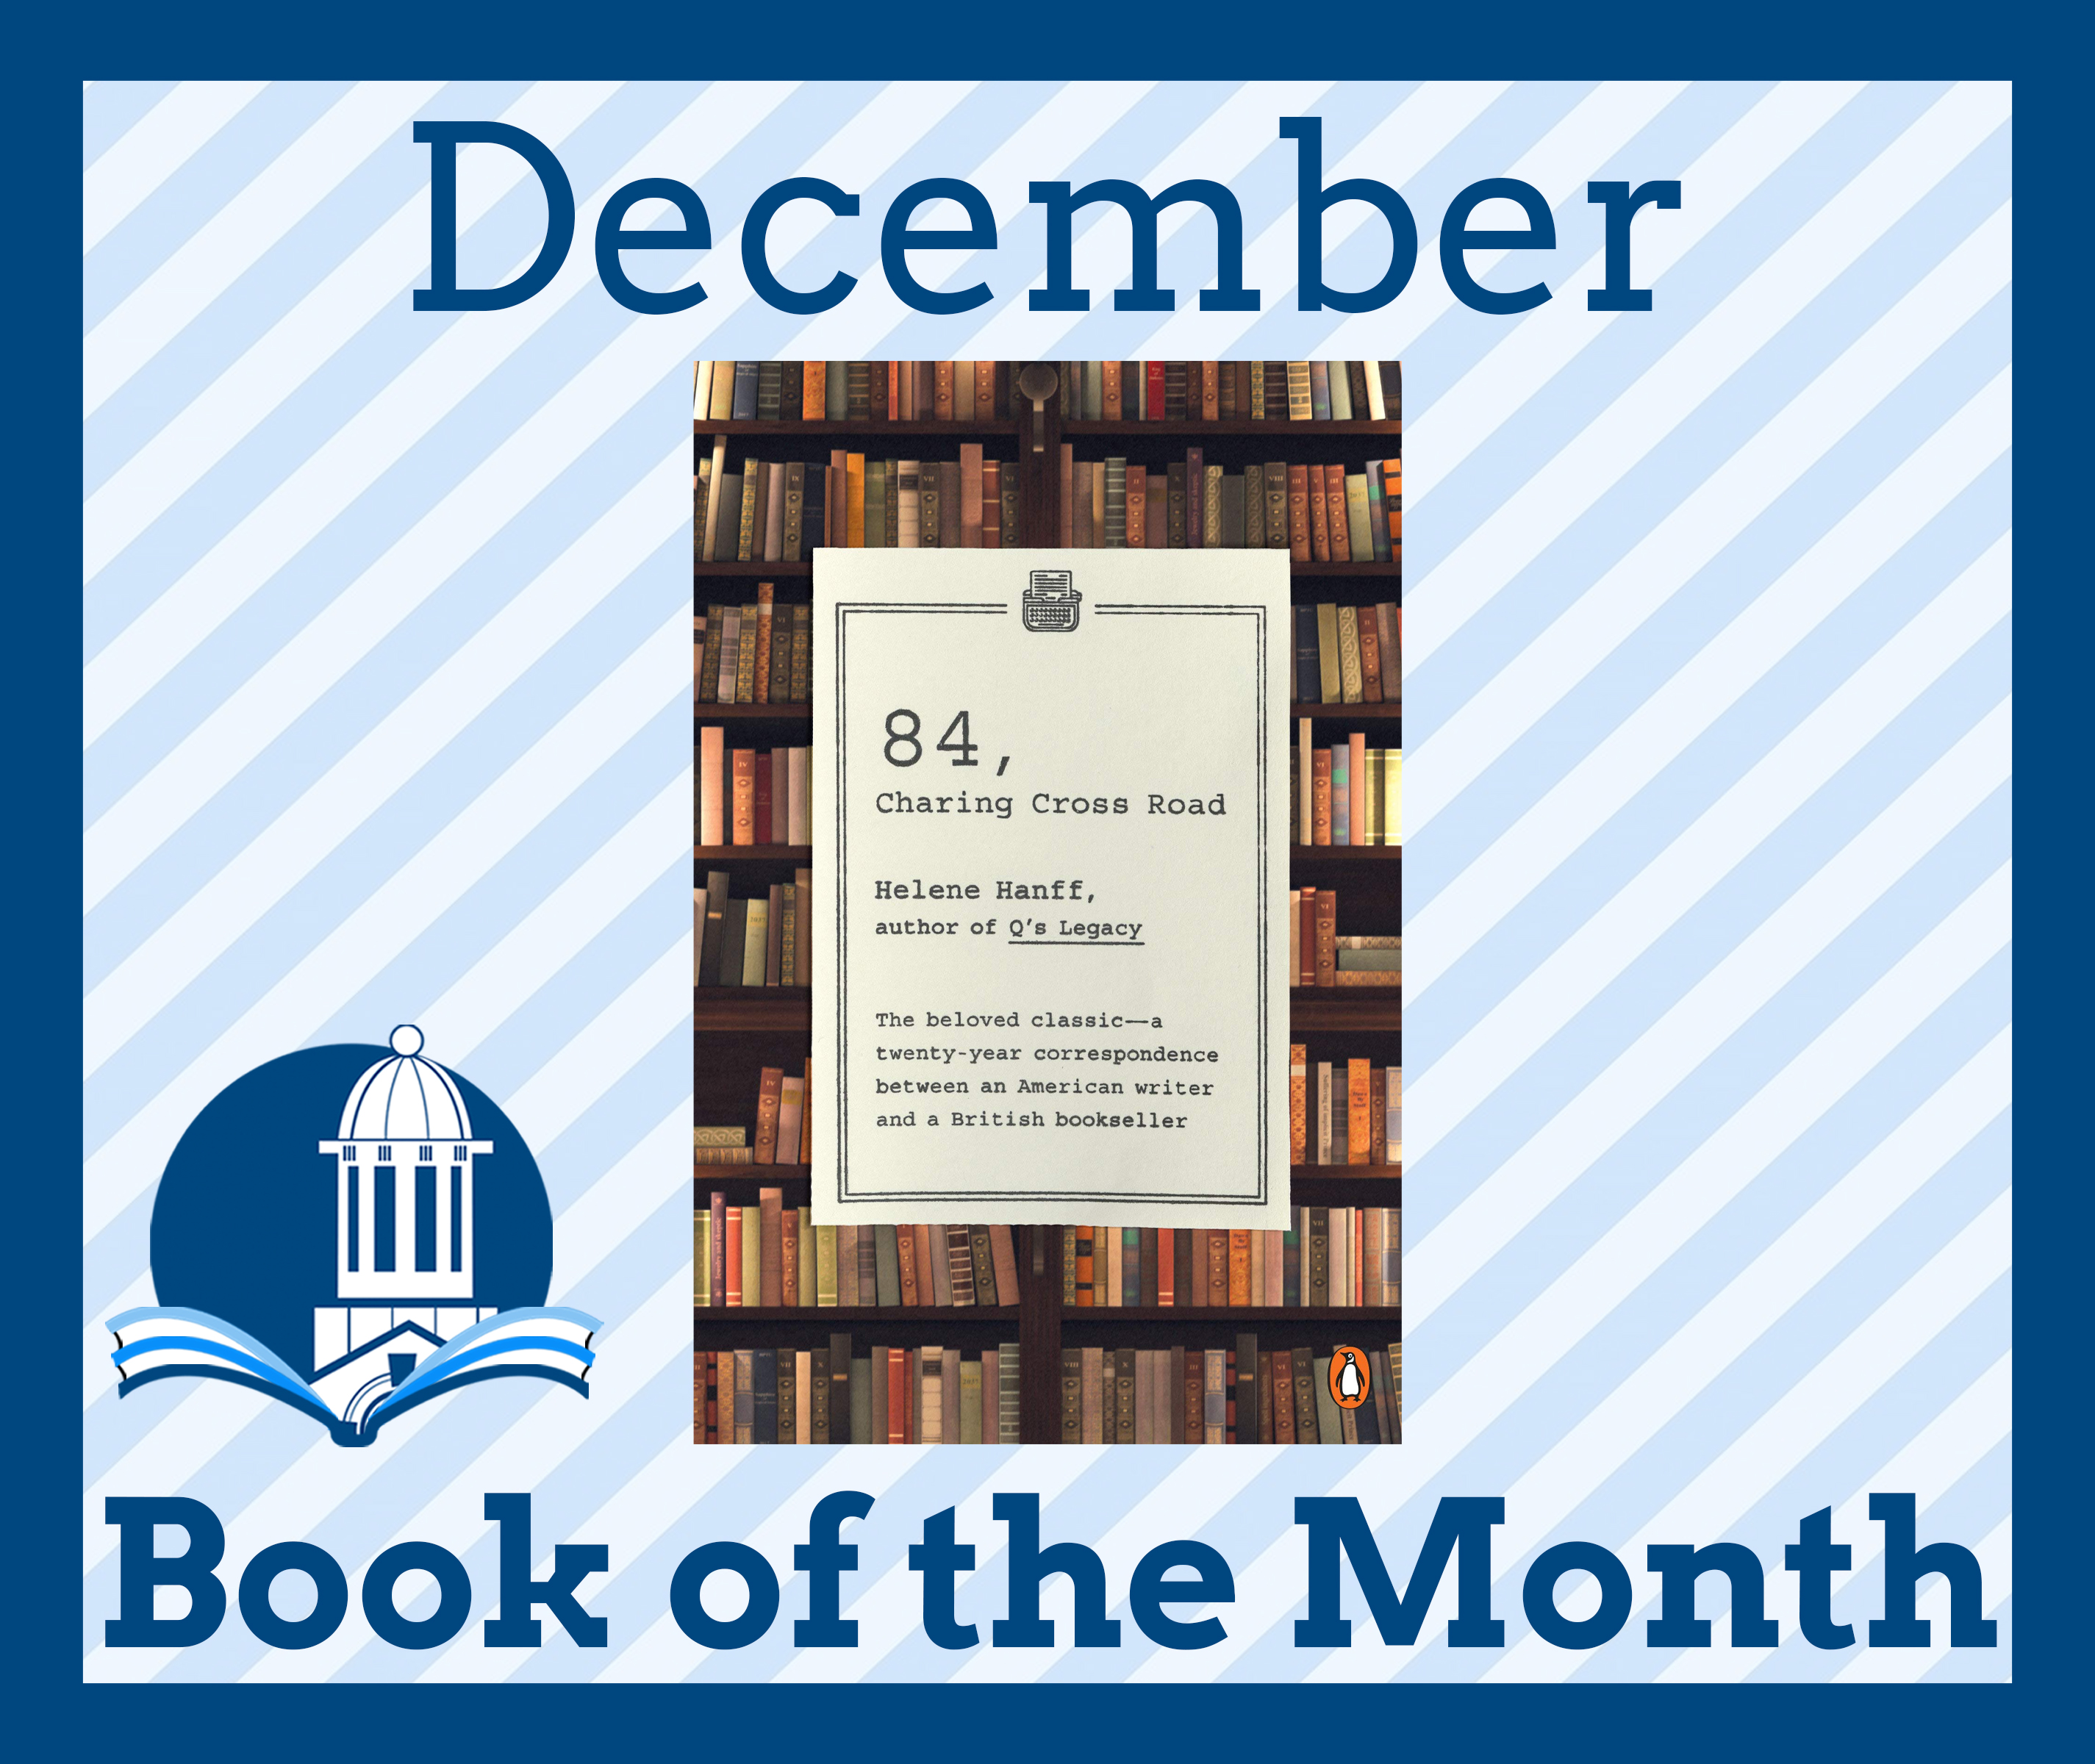 December Book of the Month: 84, Charing Cross Road